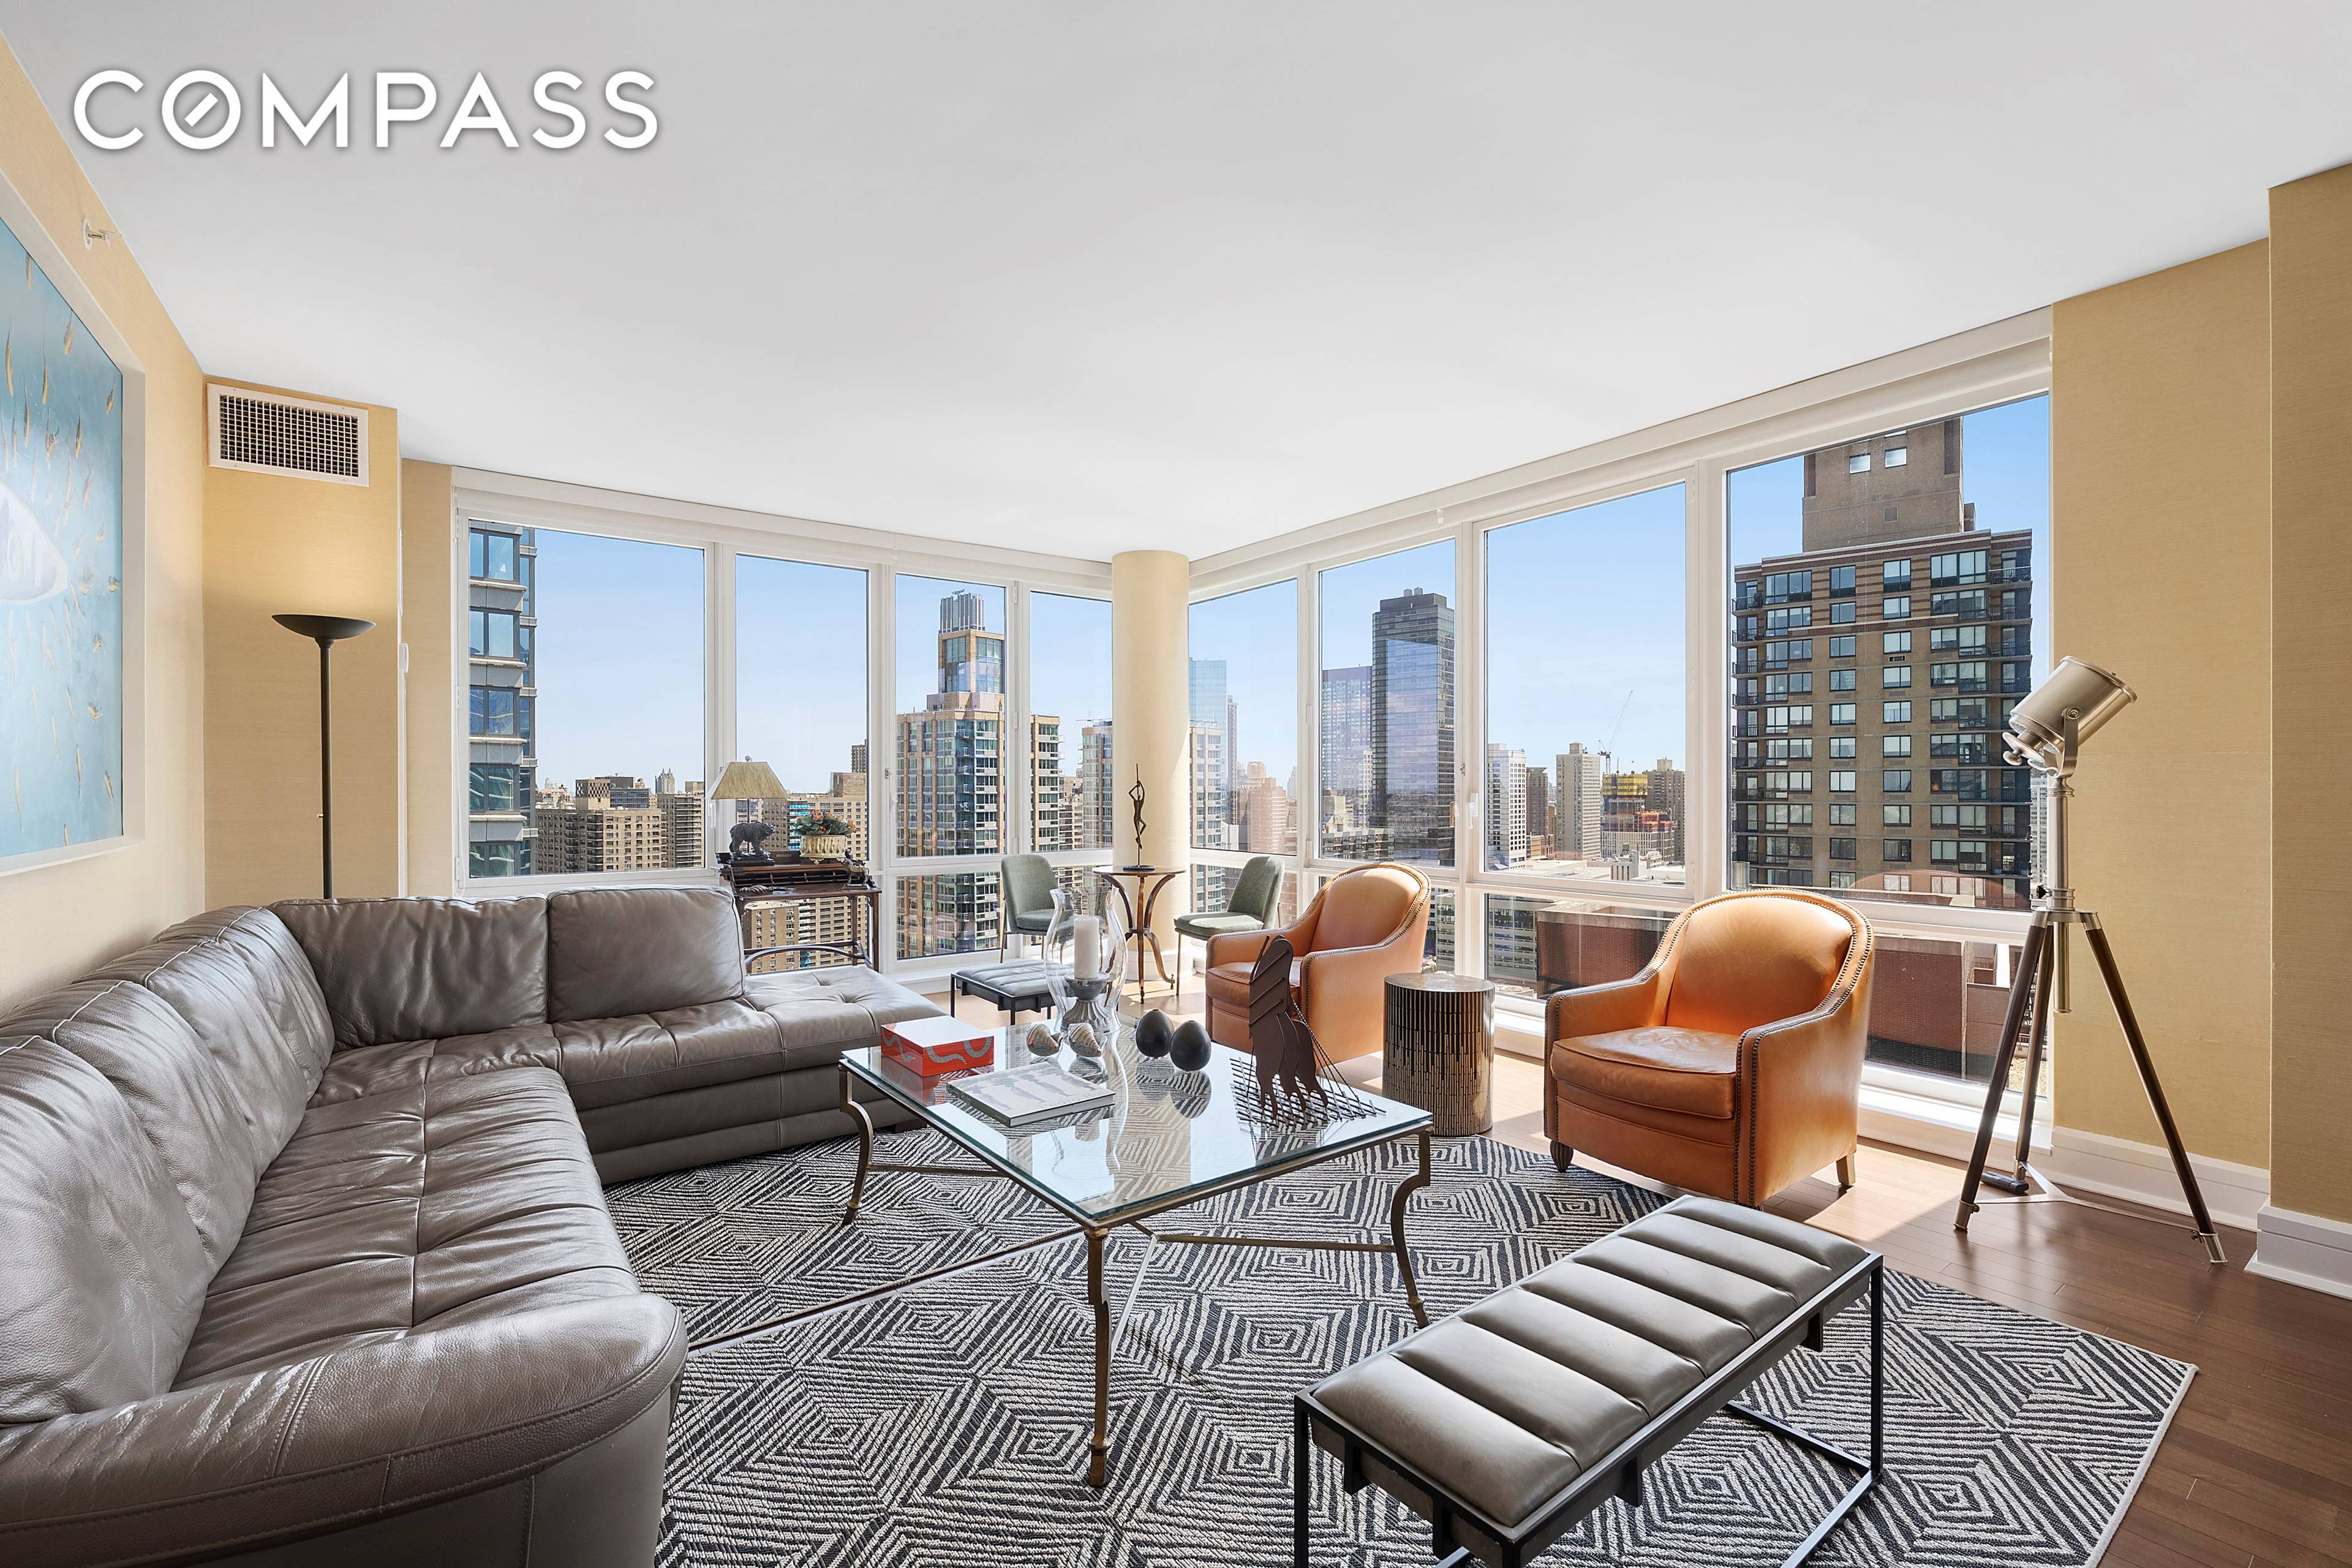 ONLY RENTED FURNISHED This fully furnished 3 bedroom, 3 bath residence boasts expansive New York City skyline and Hudson River views.